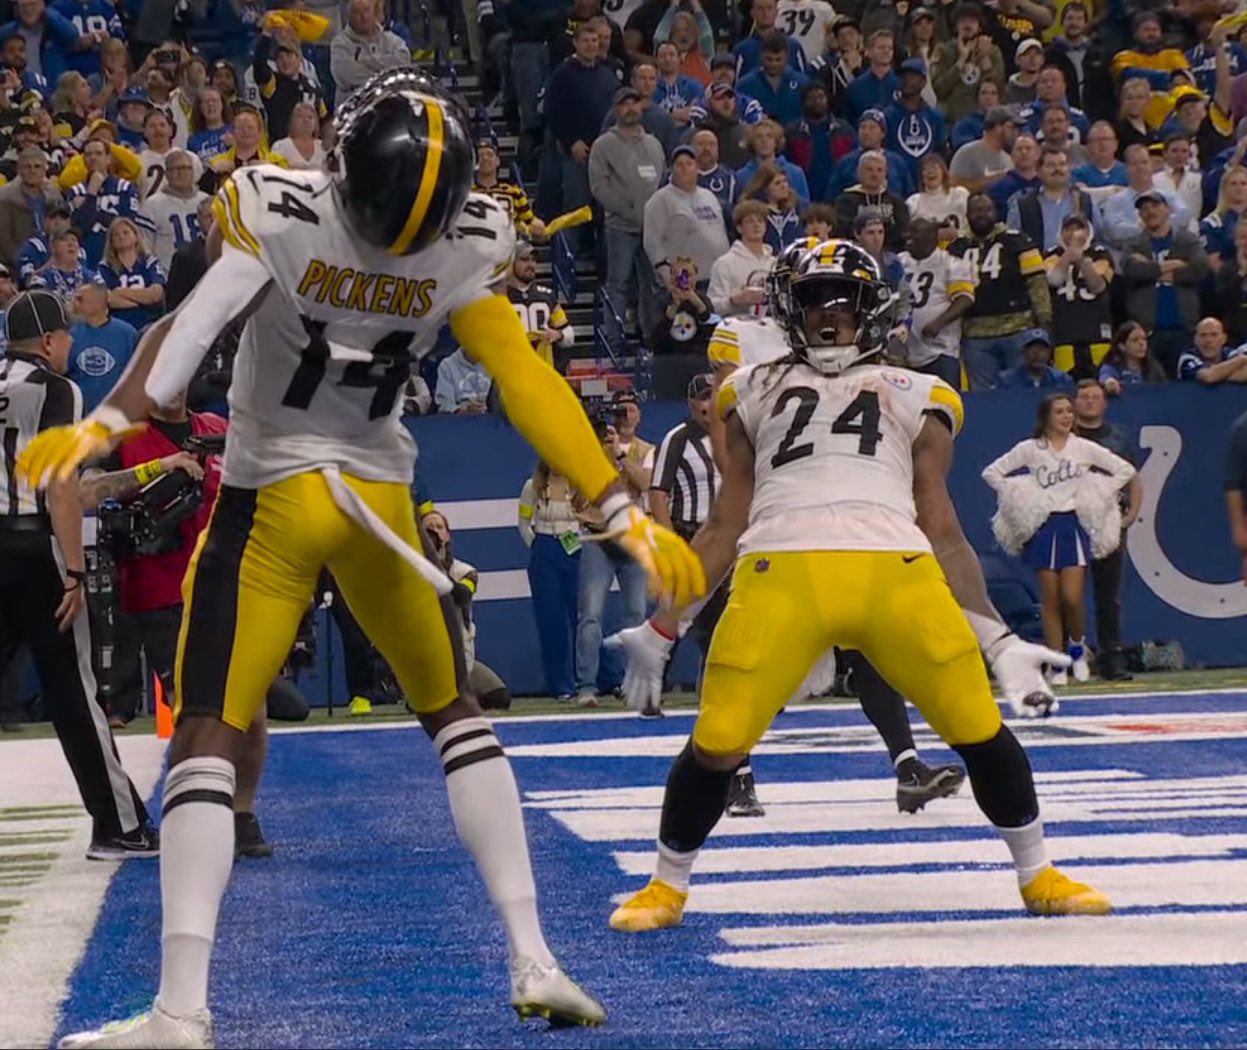 Pittsburgh Steelers Erase Deficit, Beat Colts 2417 in Week 12